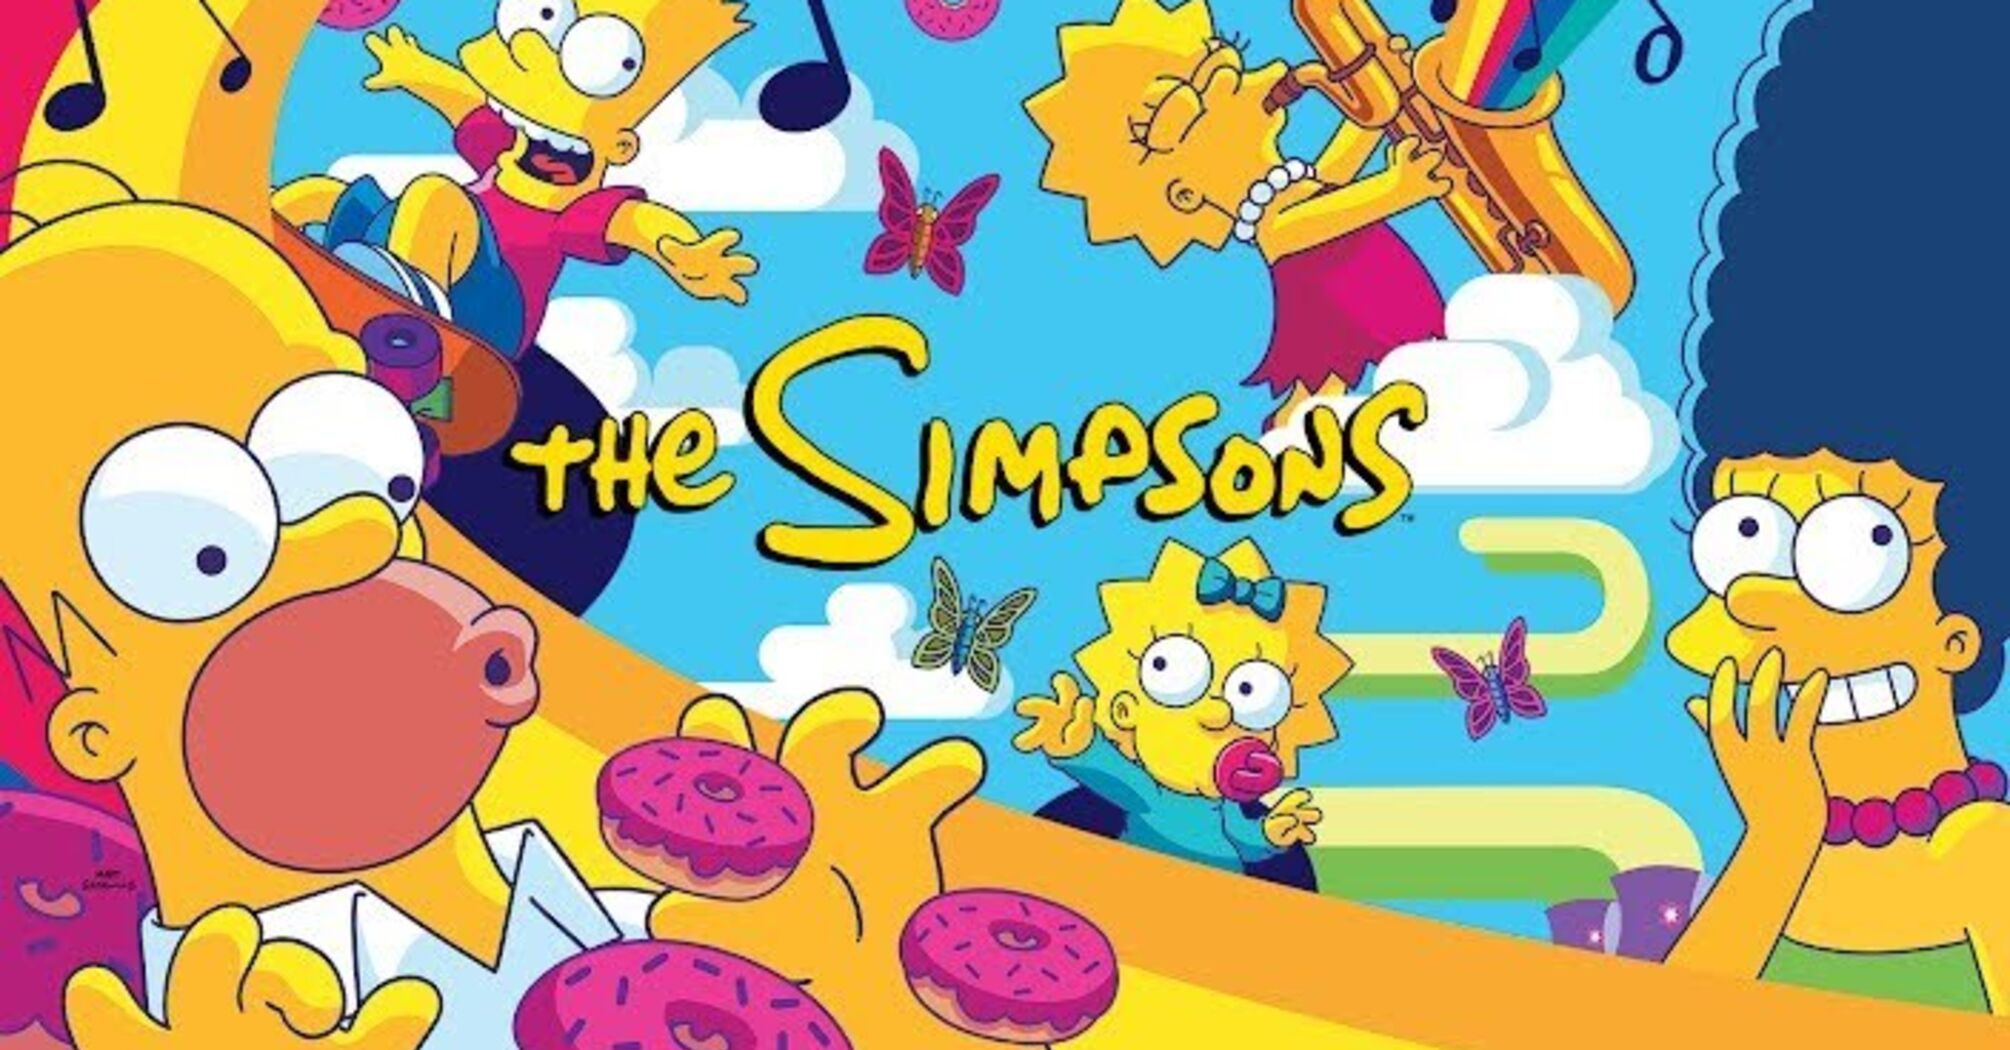 Top 5 favorite episodes of the Simpsons